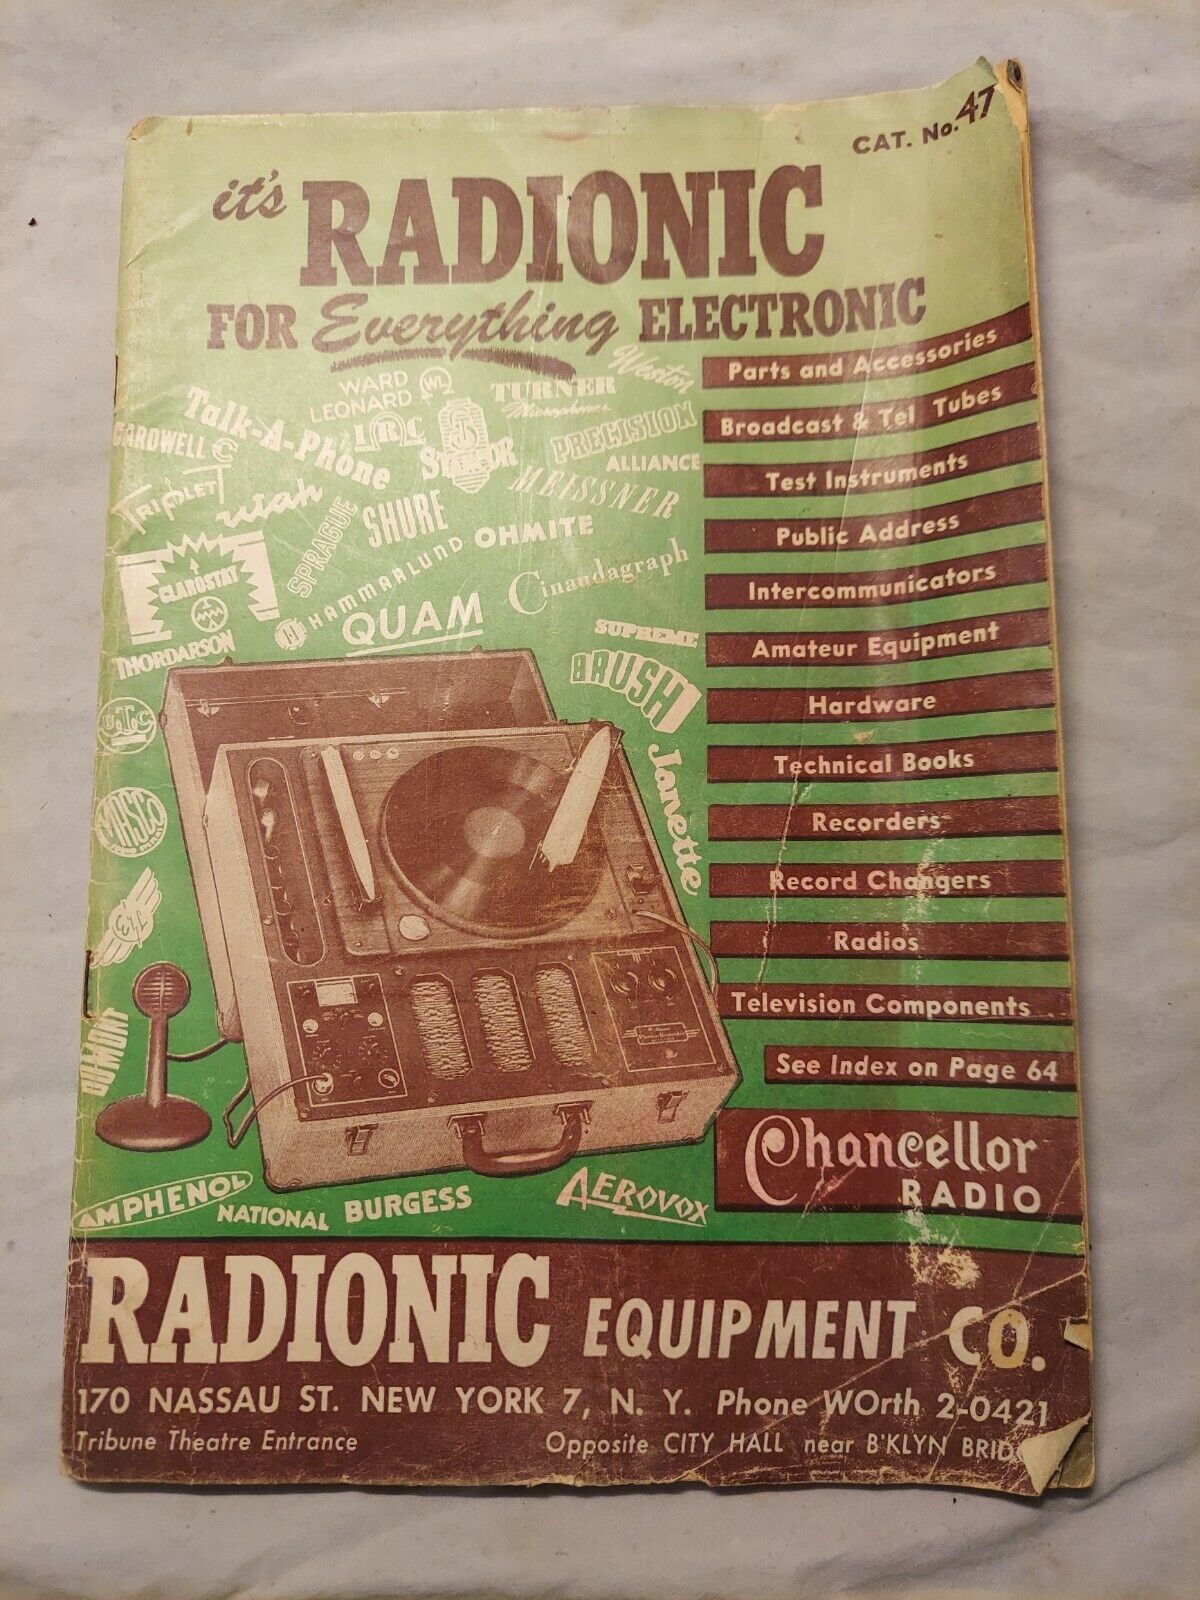 Its Radionic For Everything Electronic Catalog New York Cat. N...